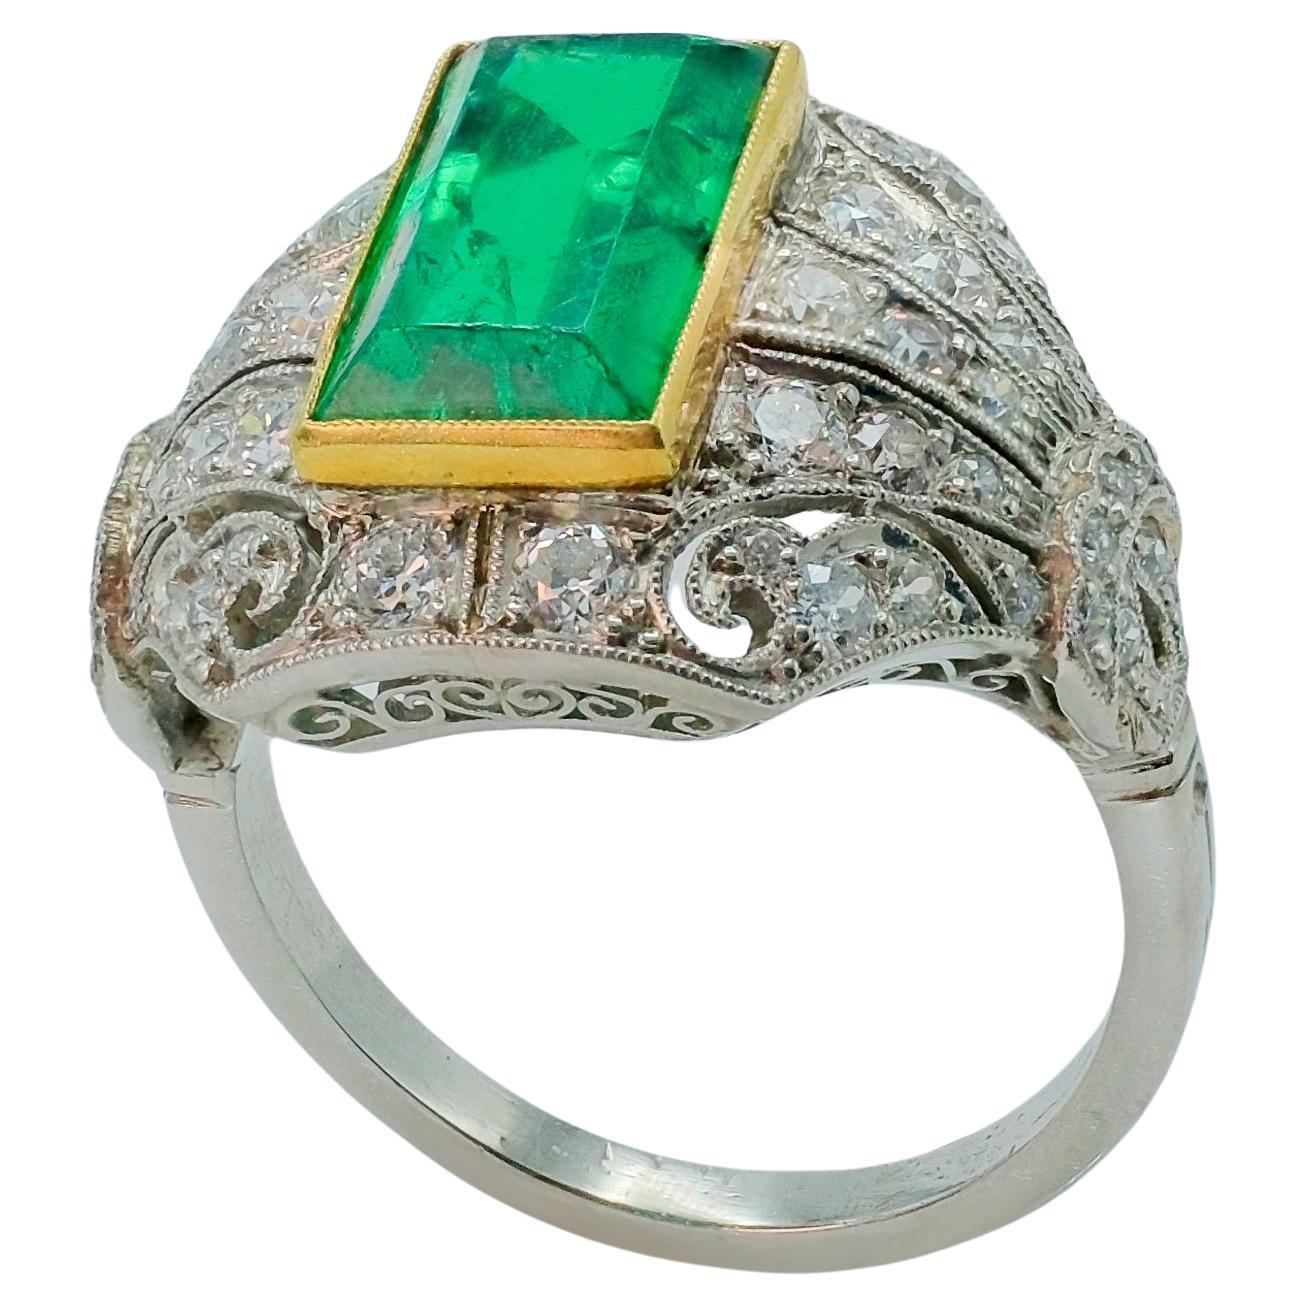 Natural columbian emerald minor oil 2.98 carats in a platinum setting with 18k yellow gold lining and 1.28 carats of GH color and VS clarity diamonds. 

Columbian emeralds are one of the most sought after stone due to their scarce nature in the